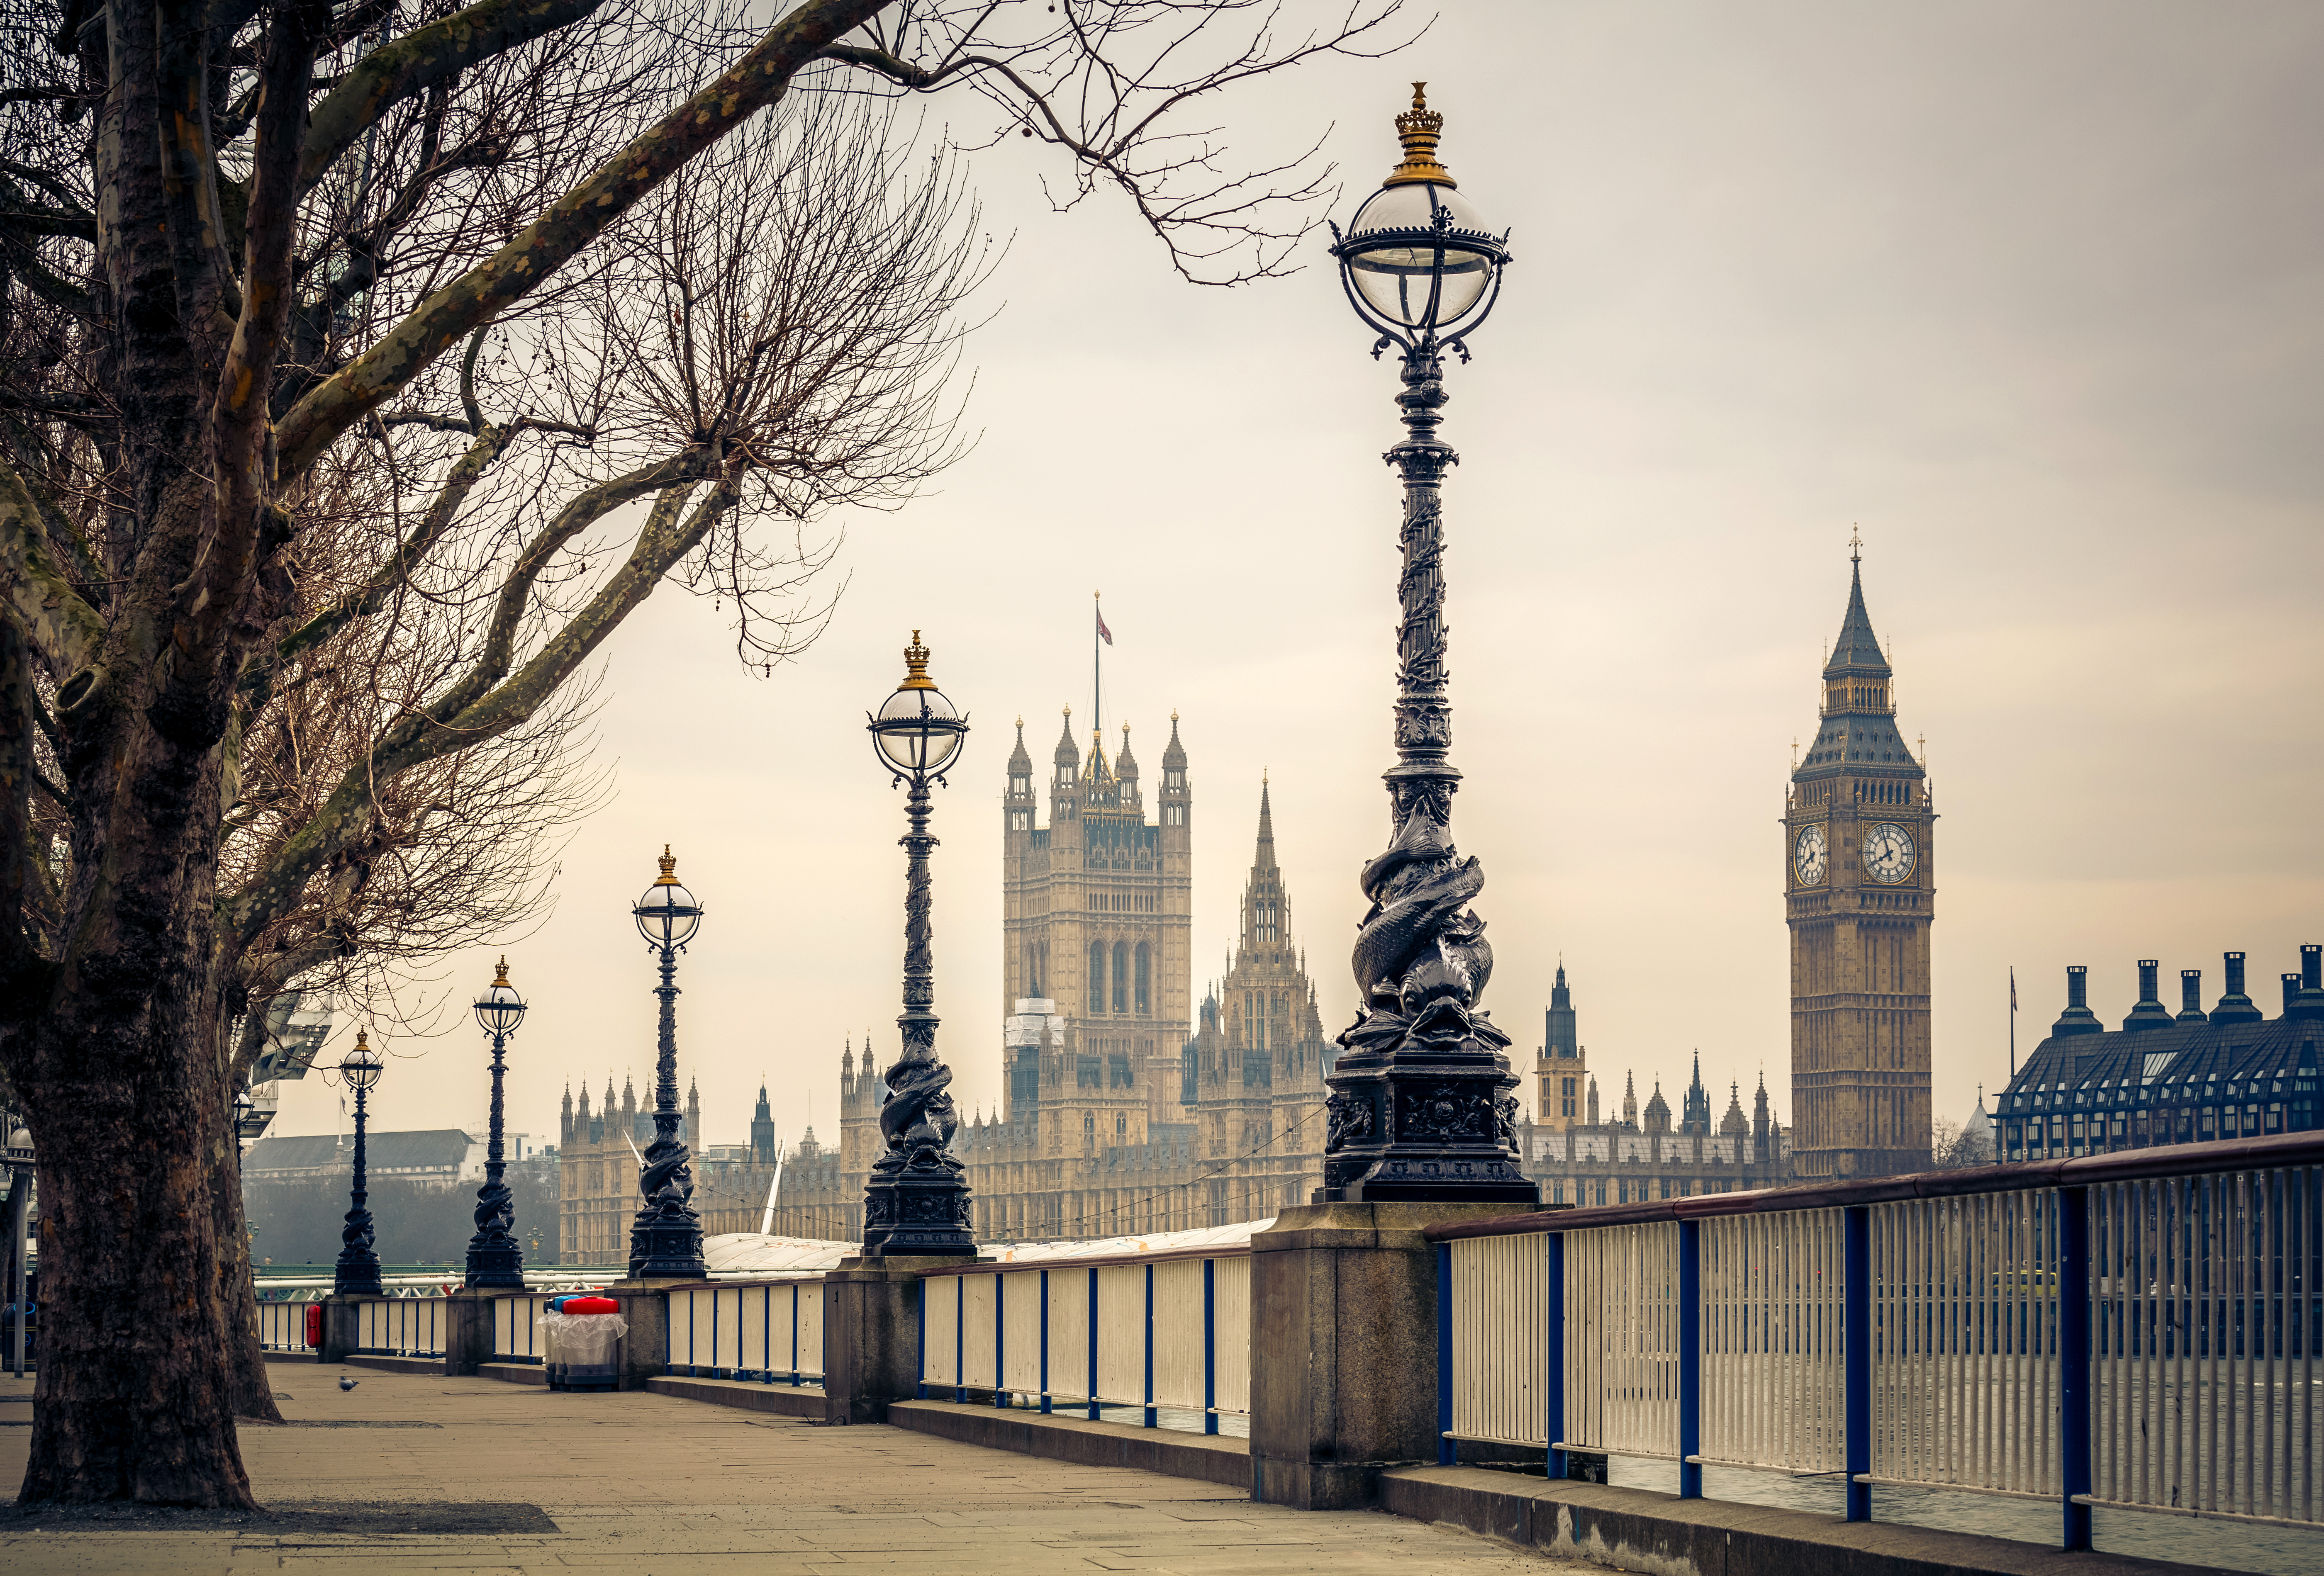 Big Ben Lamp Post London Monument Palace Of Westminster United Kingdom 5602x3800